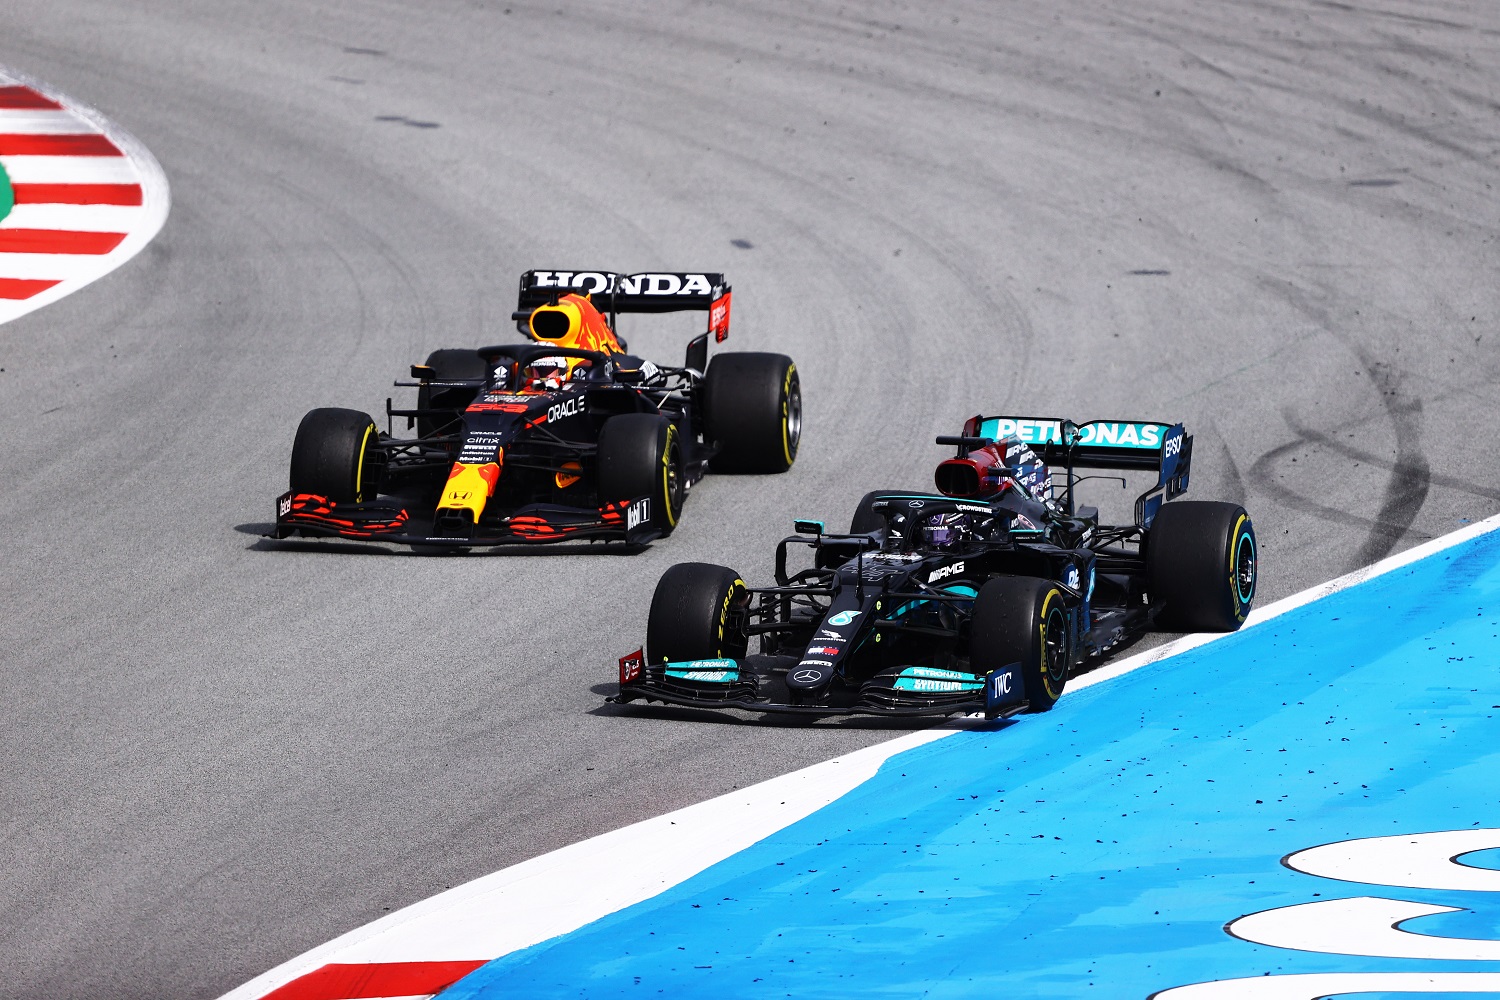 Lewis Hamilton, right, leads Max Verstappen during the Formula 1 Grand Prix of Spain at Circuit de Barcelona-Catalunya on May 9, 2021. | Bryn Lennon/Getty Images